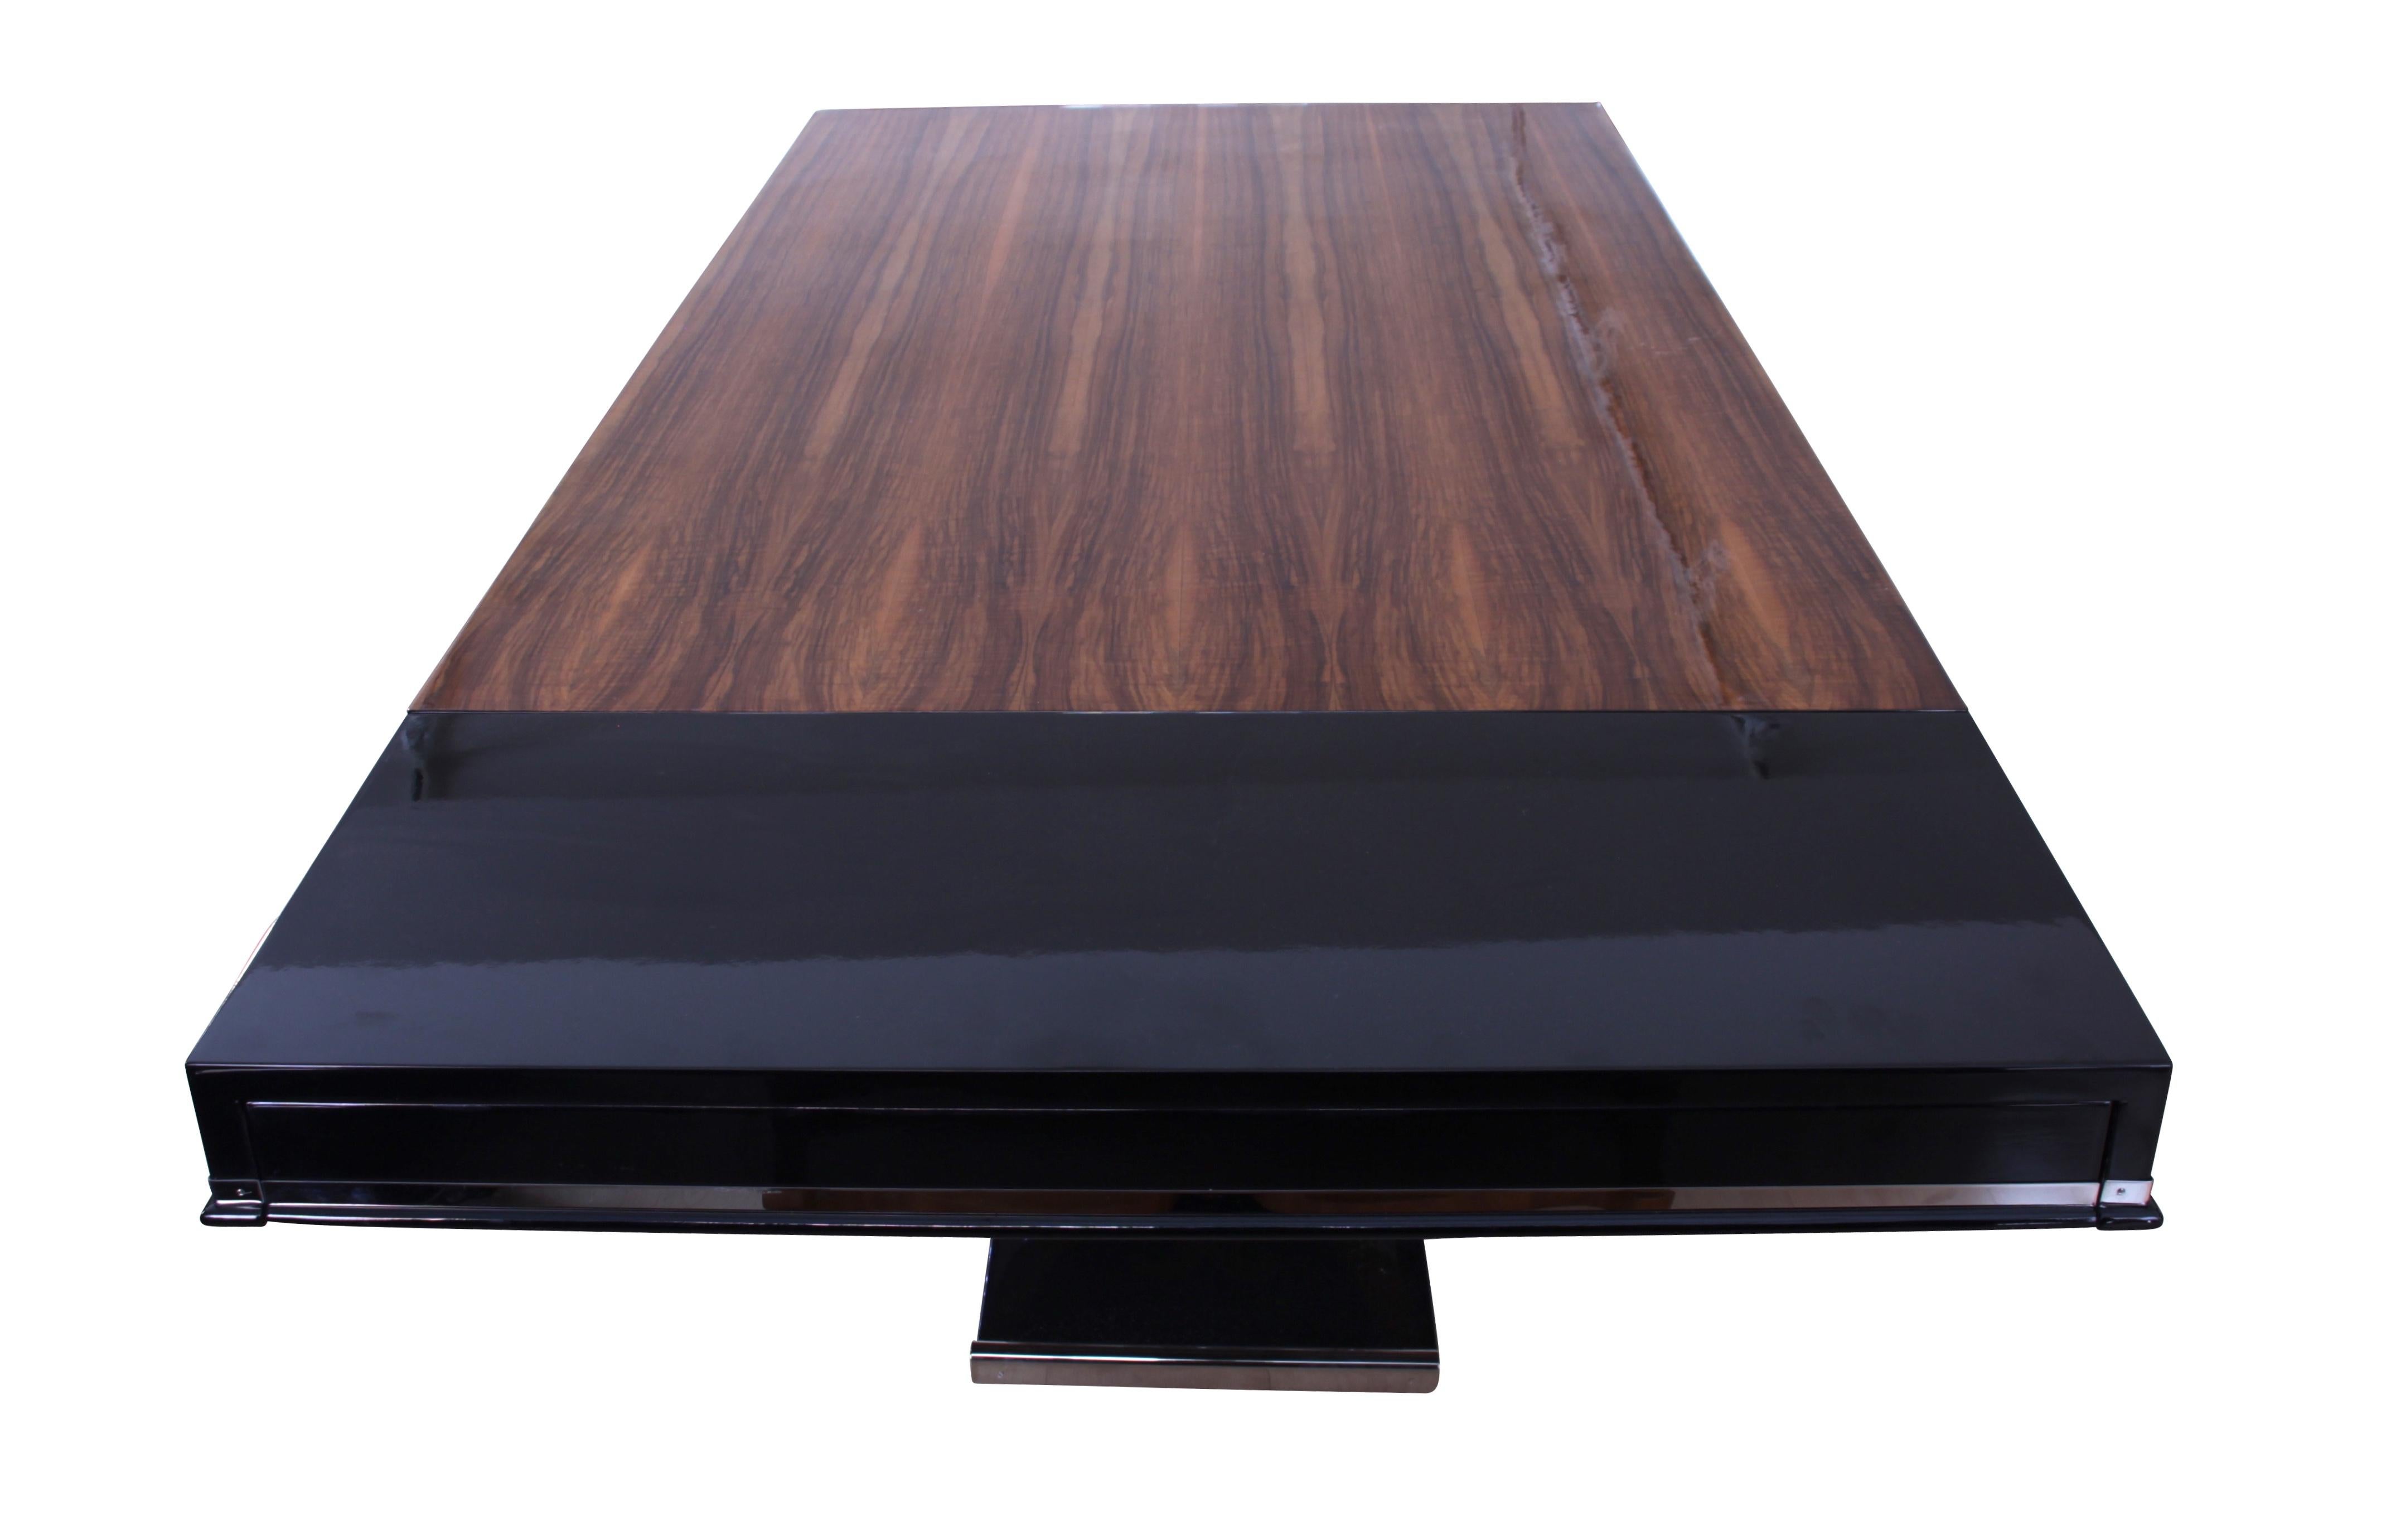 French Art Deco Dining Table, Expandable, Walnut Veneer, Black Lacquer, France, 1930s